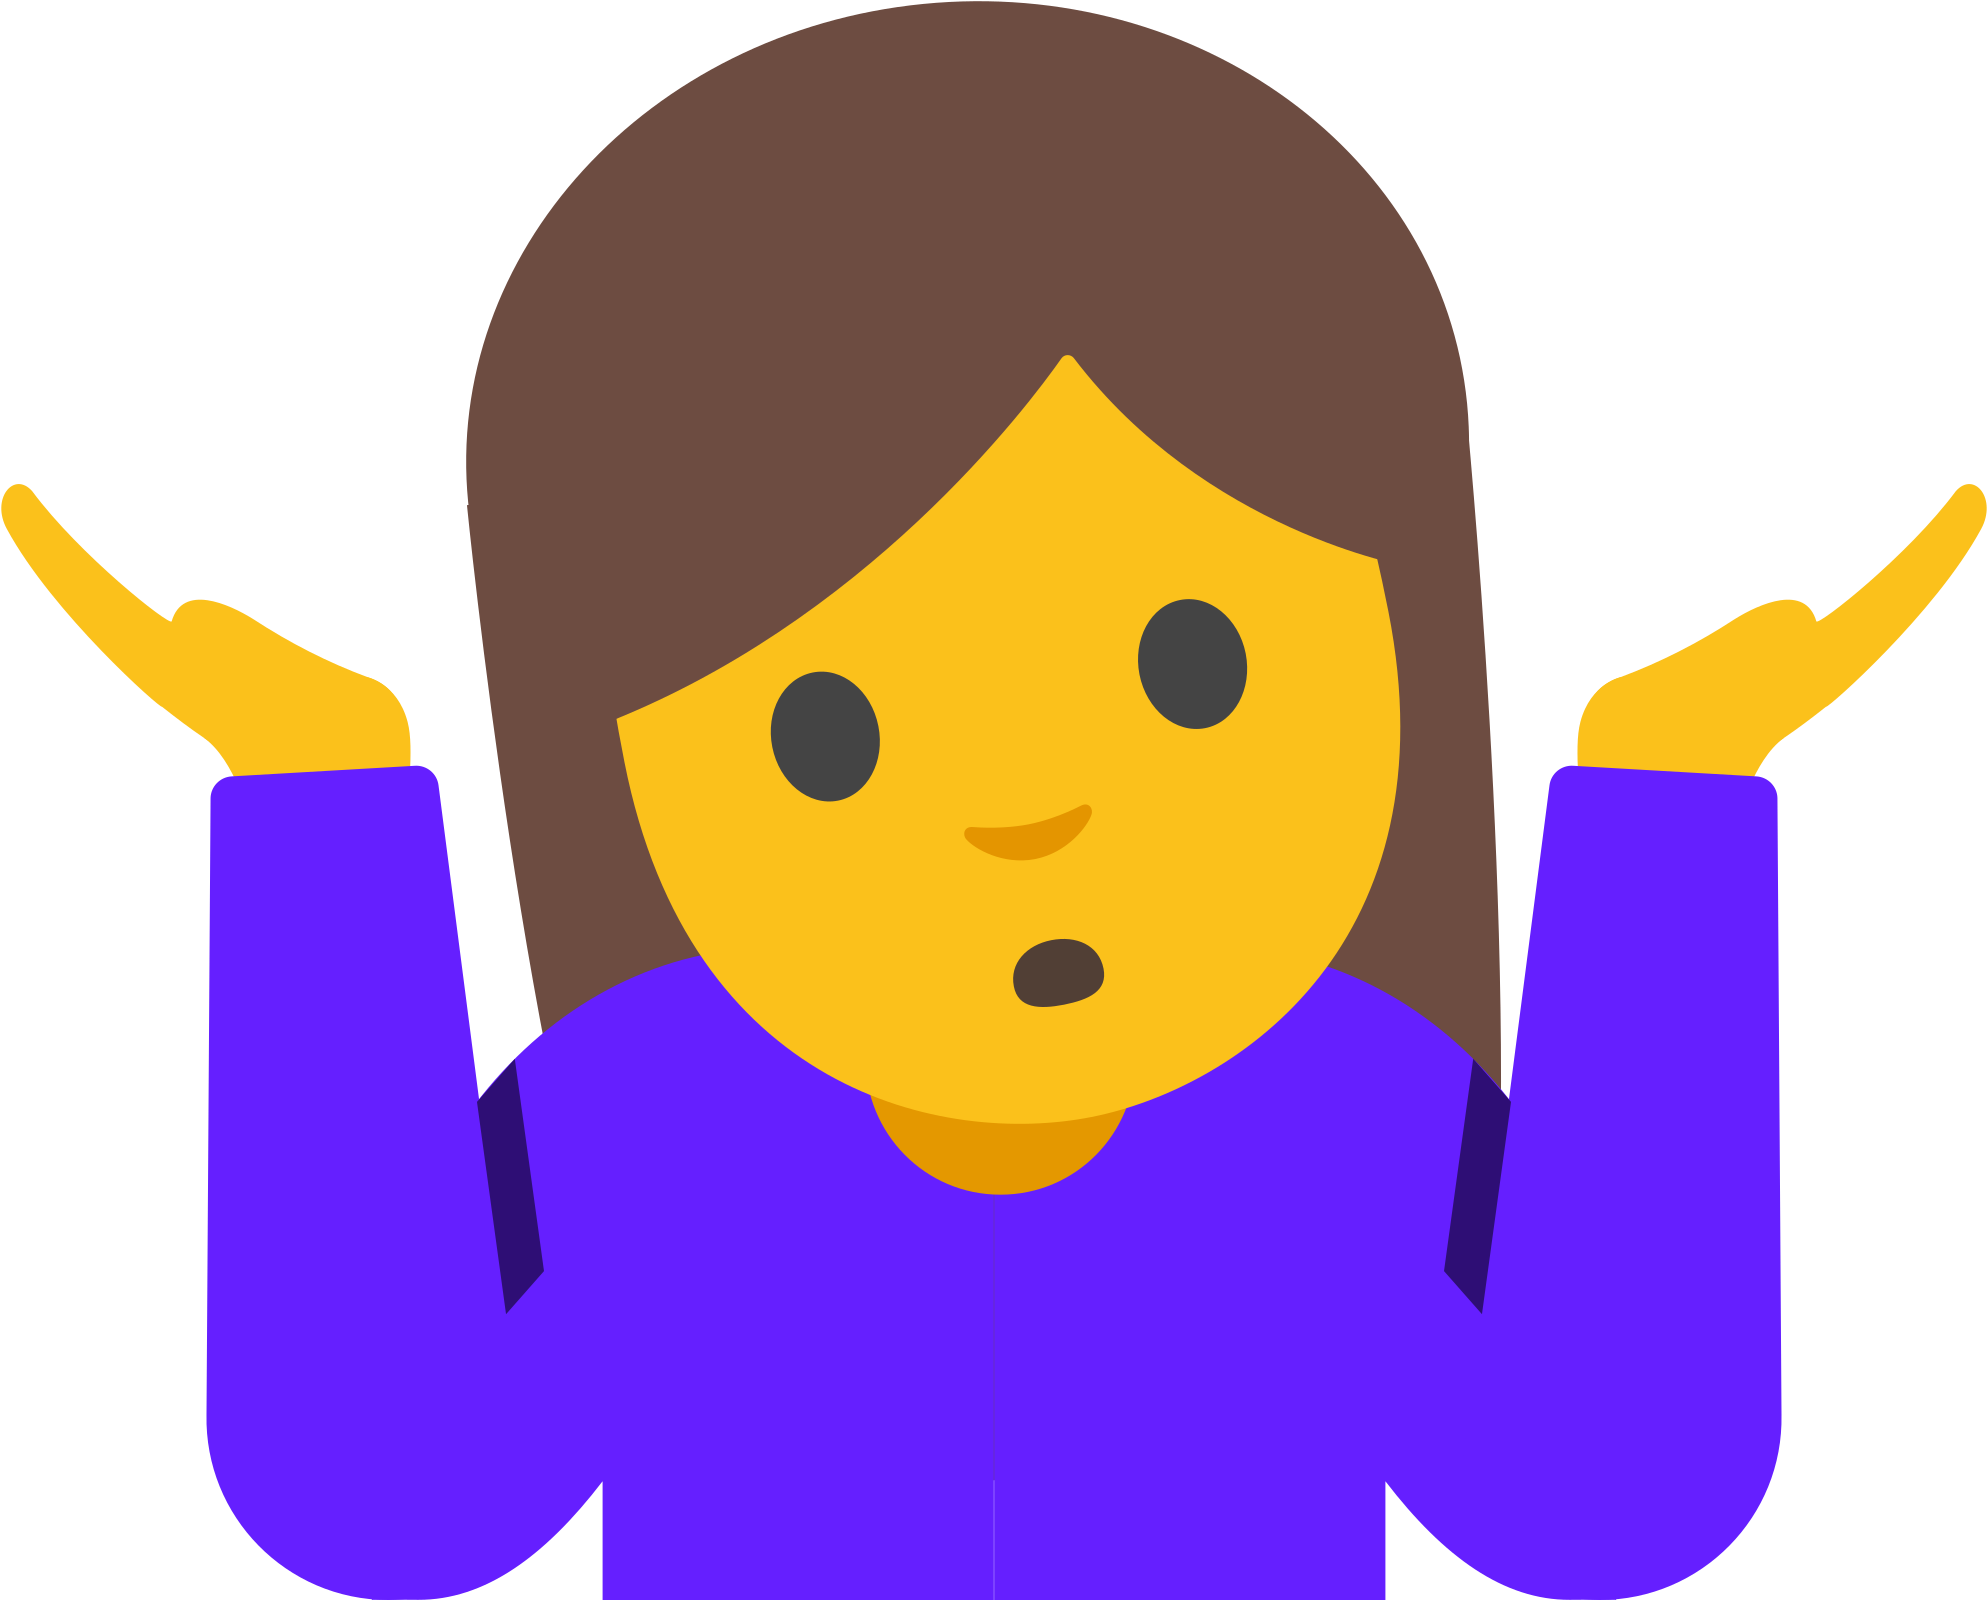 A Cartoon Of A Woman With Her Hands Up